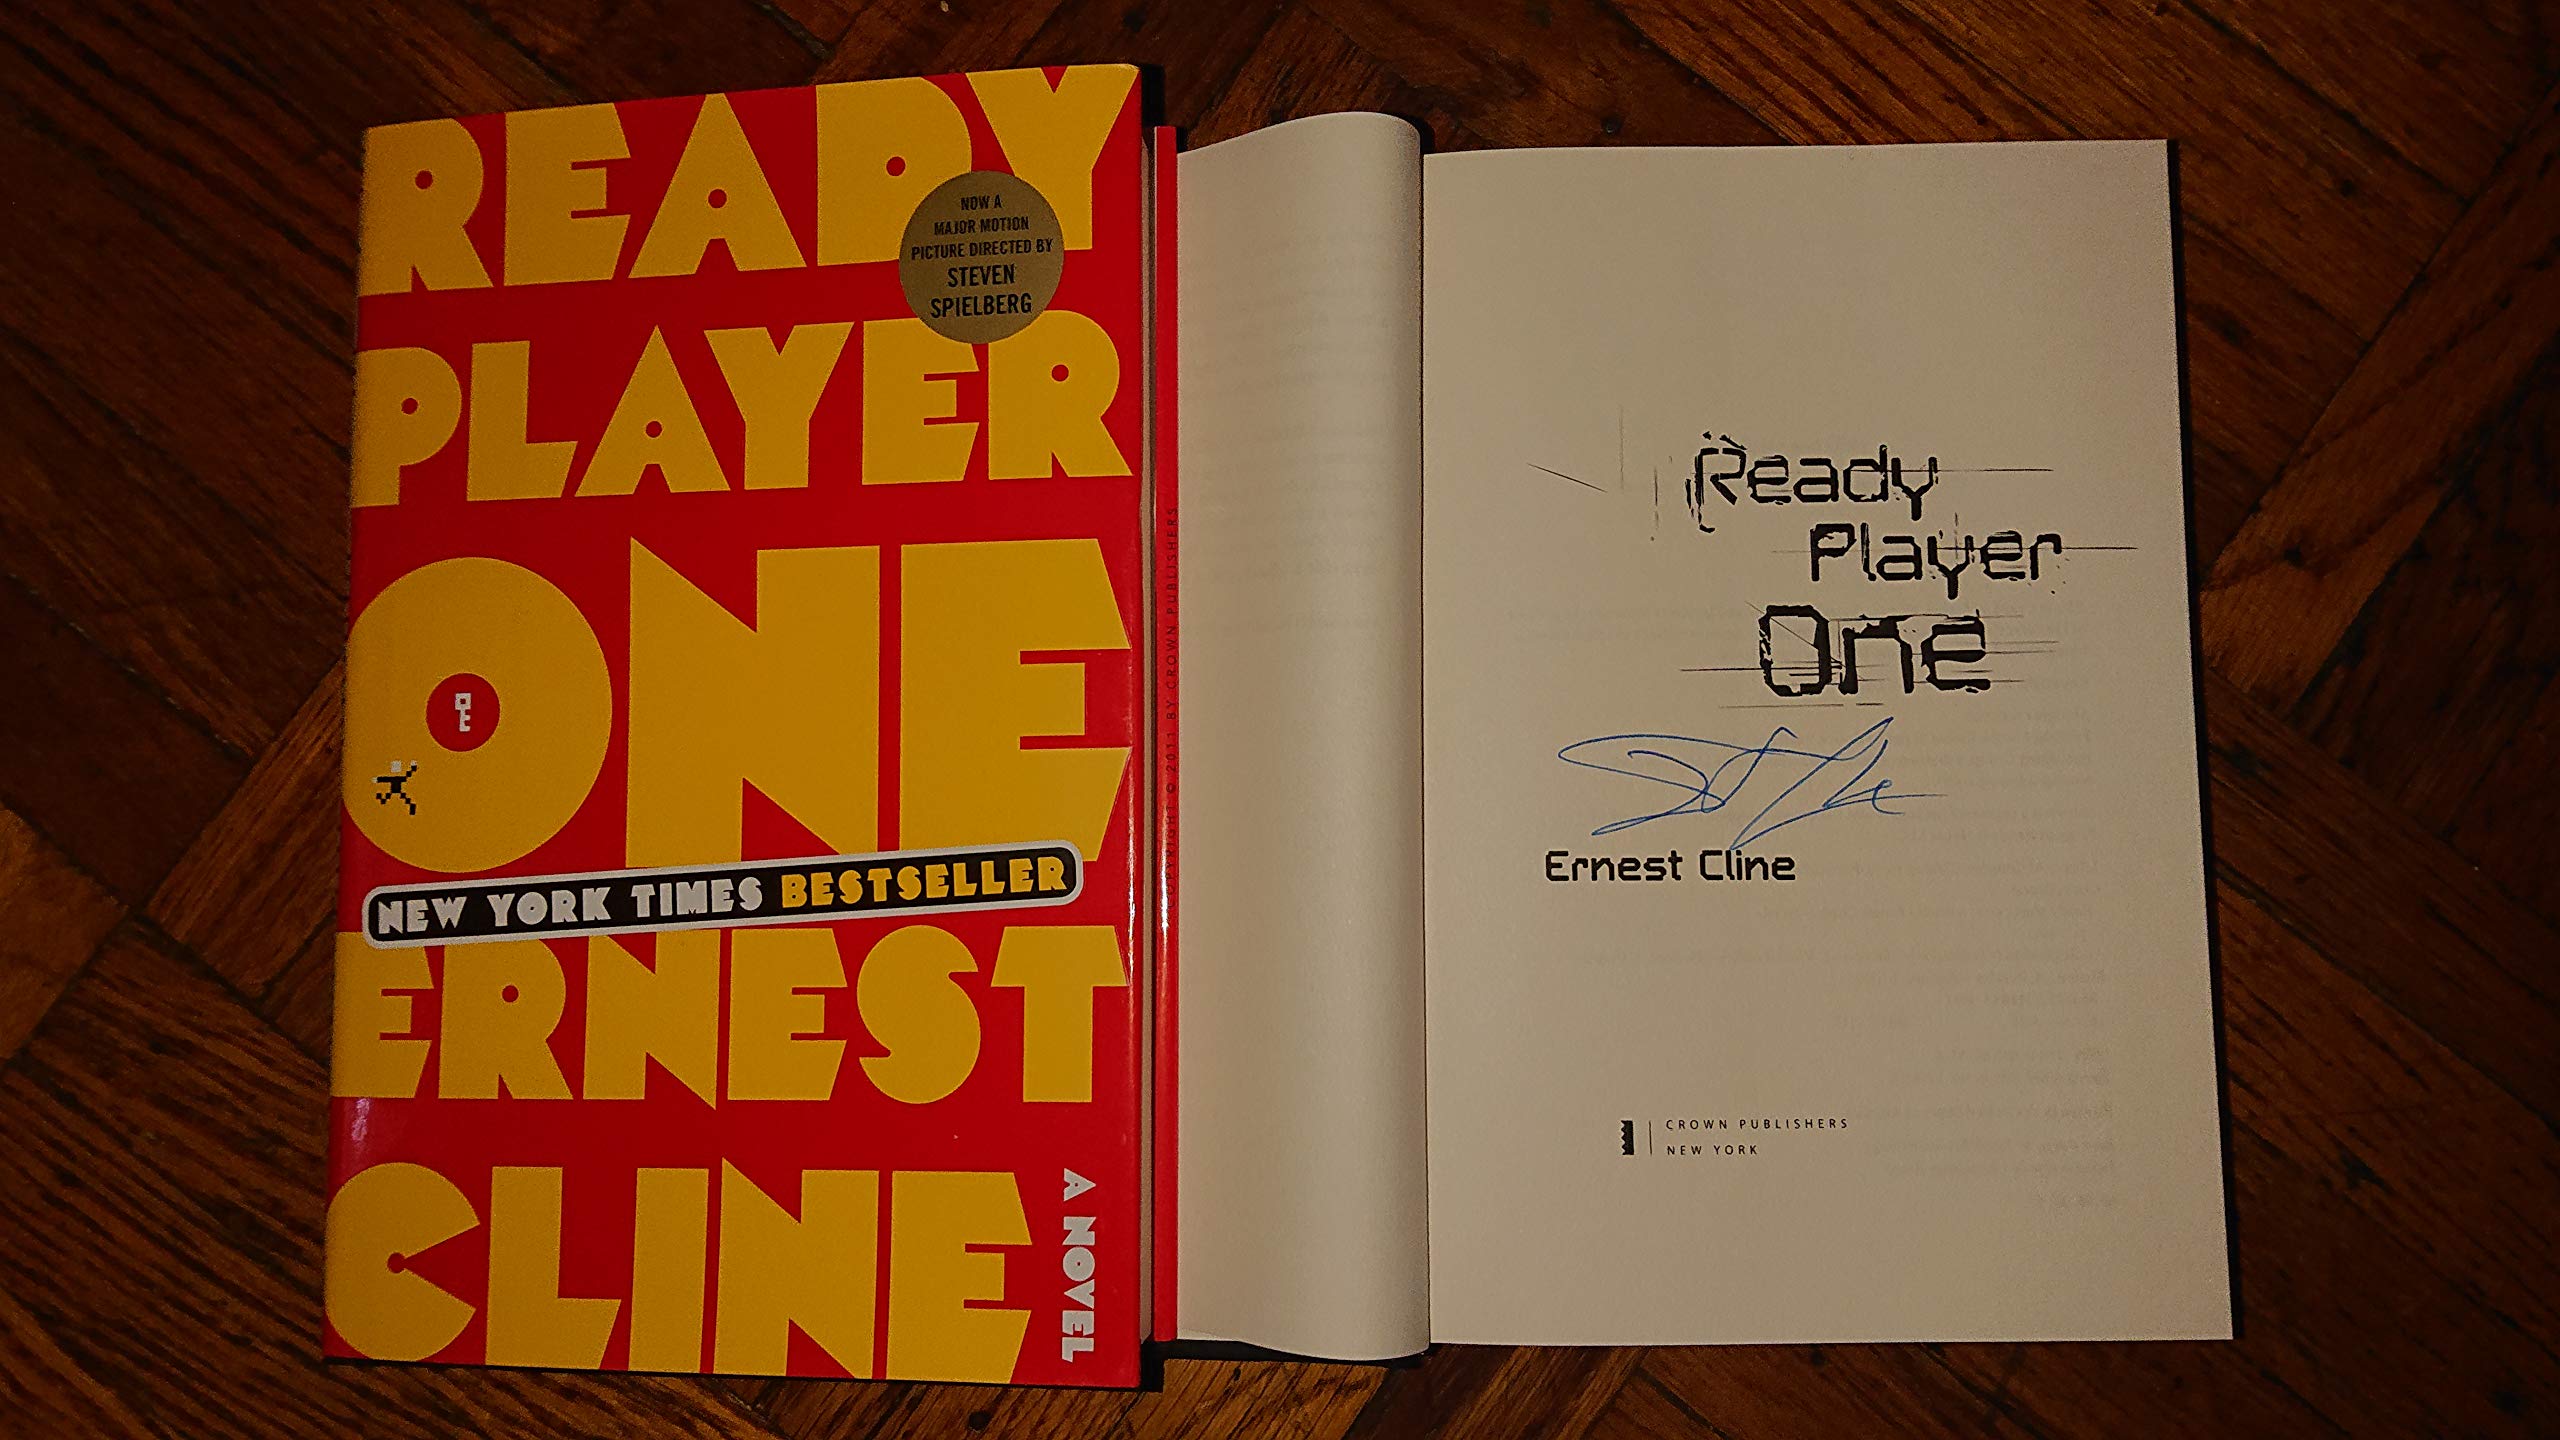 Ready Player One AUTOGRAPHED by Ernest Cline (SIGNED EDITION) - Afbeelding 1 van 1